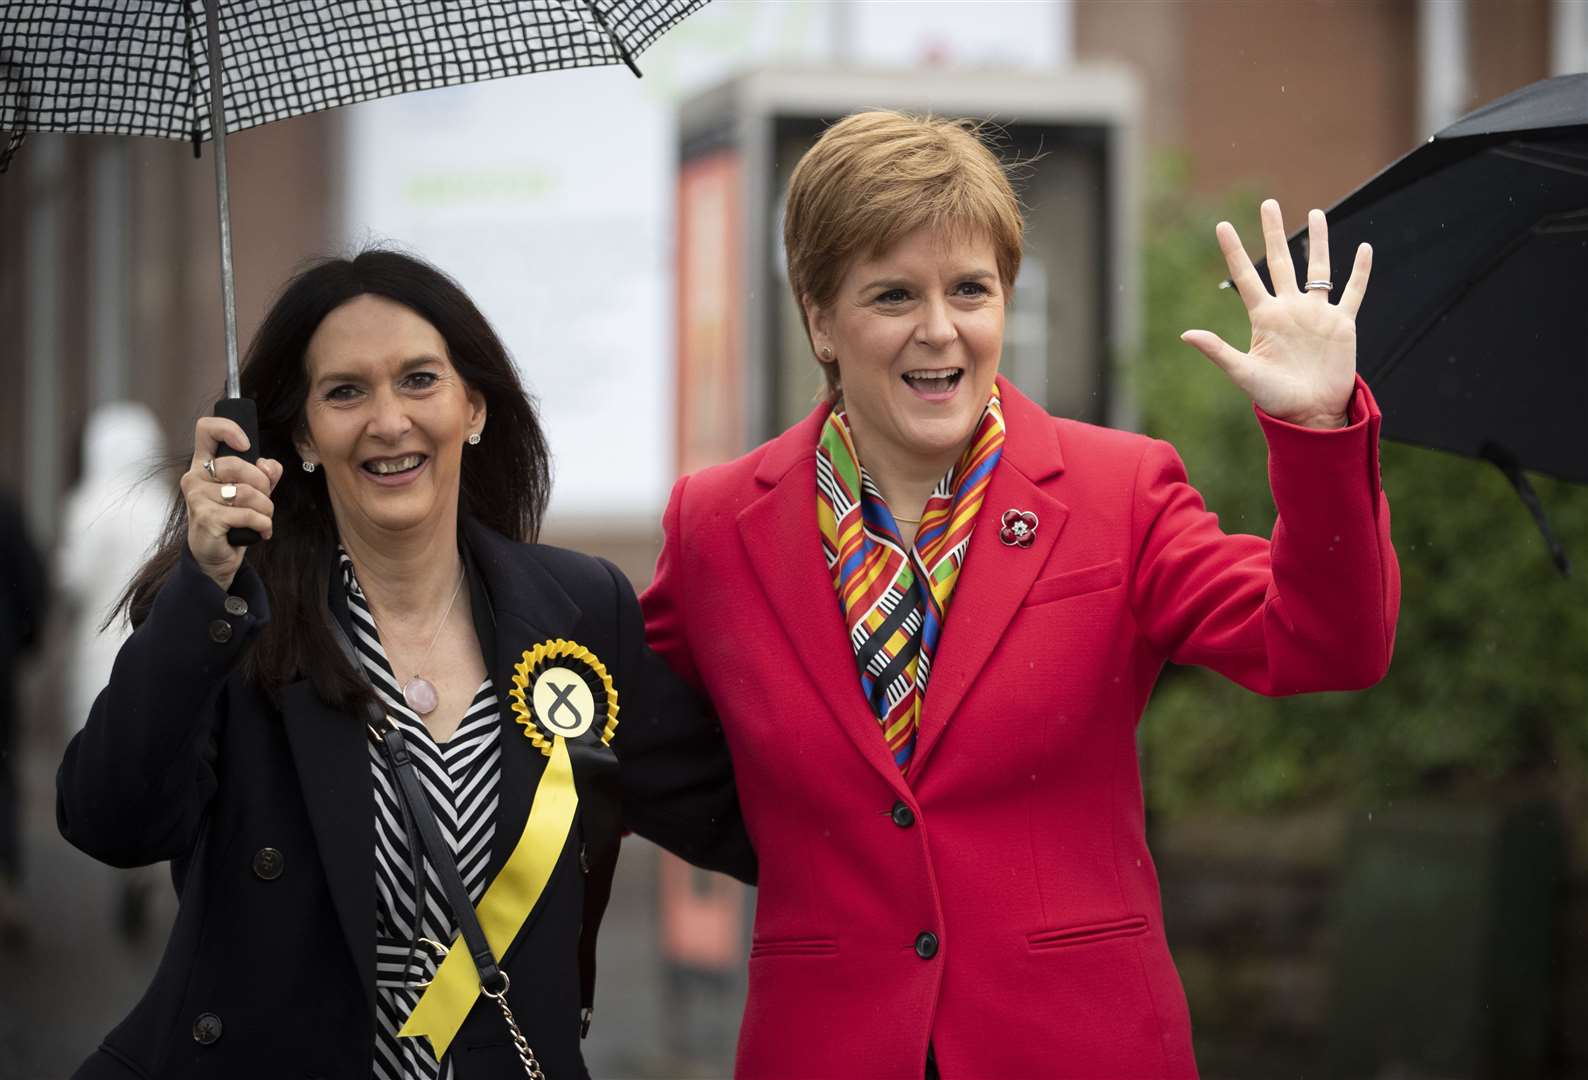 Nicola Sturgeon has repeatedly called for Margaret Ferrier to stand down (Jane Barlow/PA)